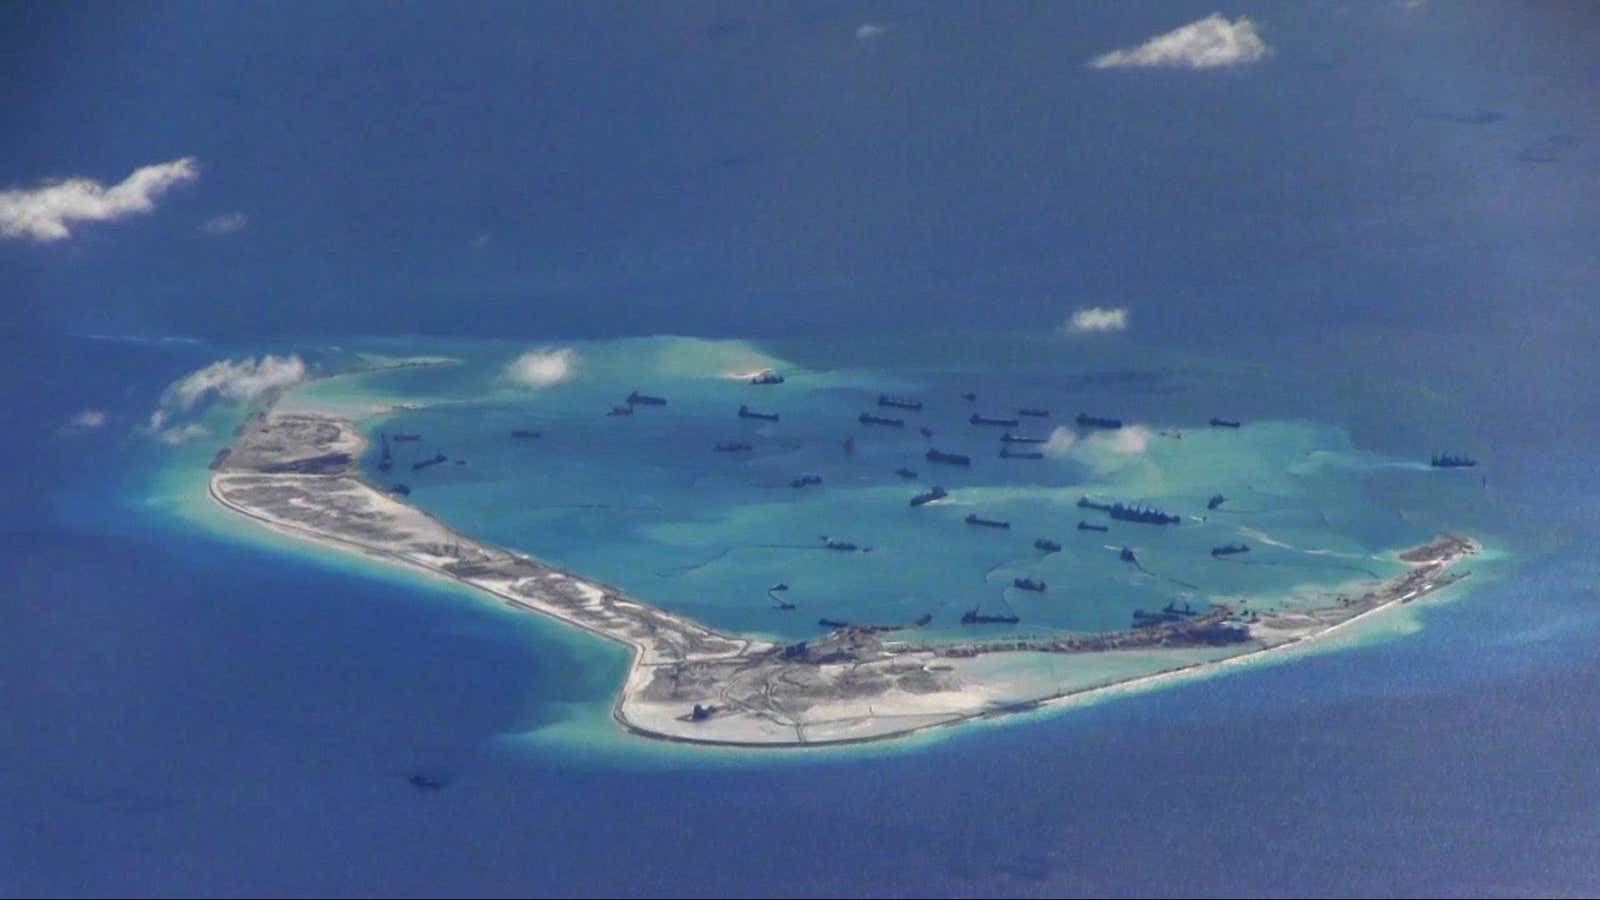 Chinese dredging vessels seen in the waters around Mischief Reef in the disputed Spratly Islands in the South China Sea.